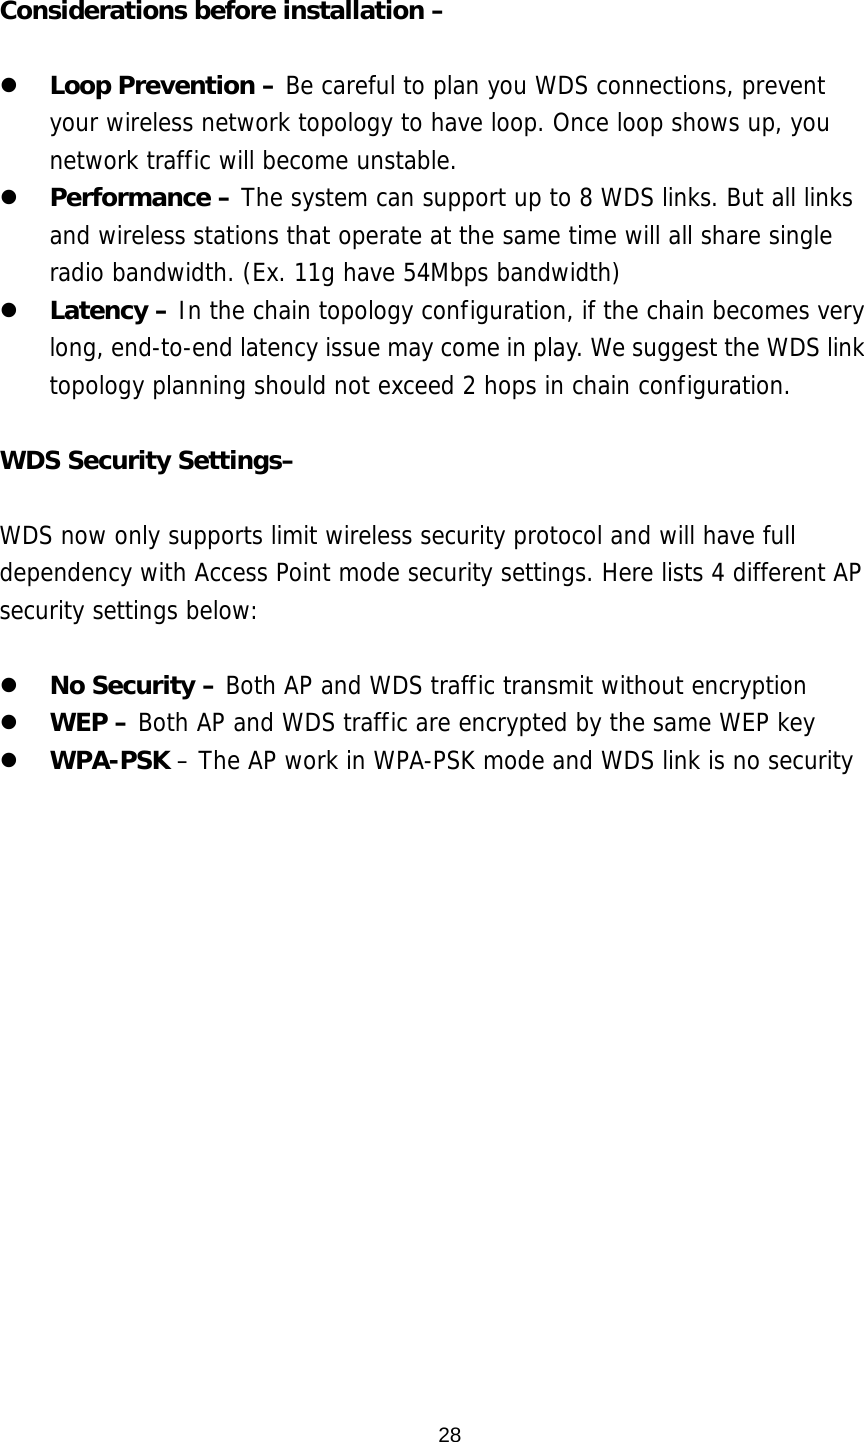  28 Considerations before installation –    Loop Prevention – Be careful to plan you WDS connections, prevent your wireless network topology to have loop. Once loop shows up, you network traffic will become unstable.    Performance – The system can support up to 8 WDS links. But all links and wireless stations that operate at the same time will all share single radio bandwidth. (Ex. 11g have 54Mbps bandwidth)   Latency – In the chain topology configuration, if the chain becomes very long, end-to-end latency issue may come in play. We suggest the WDS link topology planning should not exceed 2 hops in chain configuration.   WDS Security Settings–  WDS now only supports limit wireless security protocol and will have full dependency with Access Point mode security settings. Here lists 4 different AP security settings below:    No Security – Both AP and WDS traffic transmit without encryption   WEP – Both AP and WDS traffic are encrypted by the same WEP key   WPA-PSK – The AP work in WPA-PSK mode and WDS link is no security   